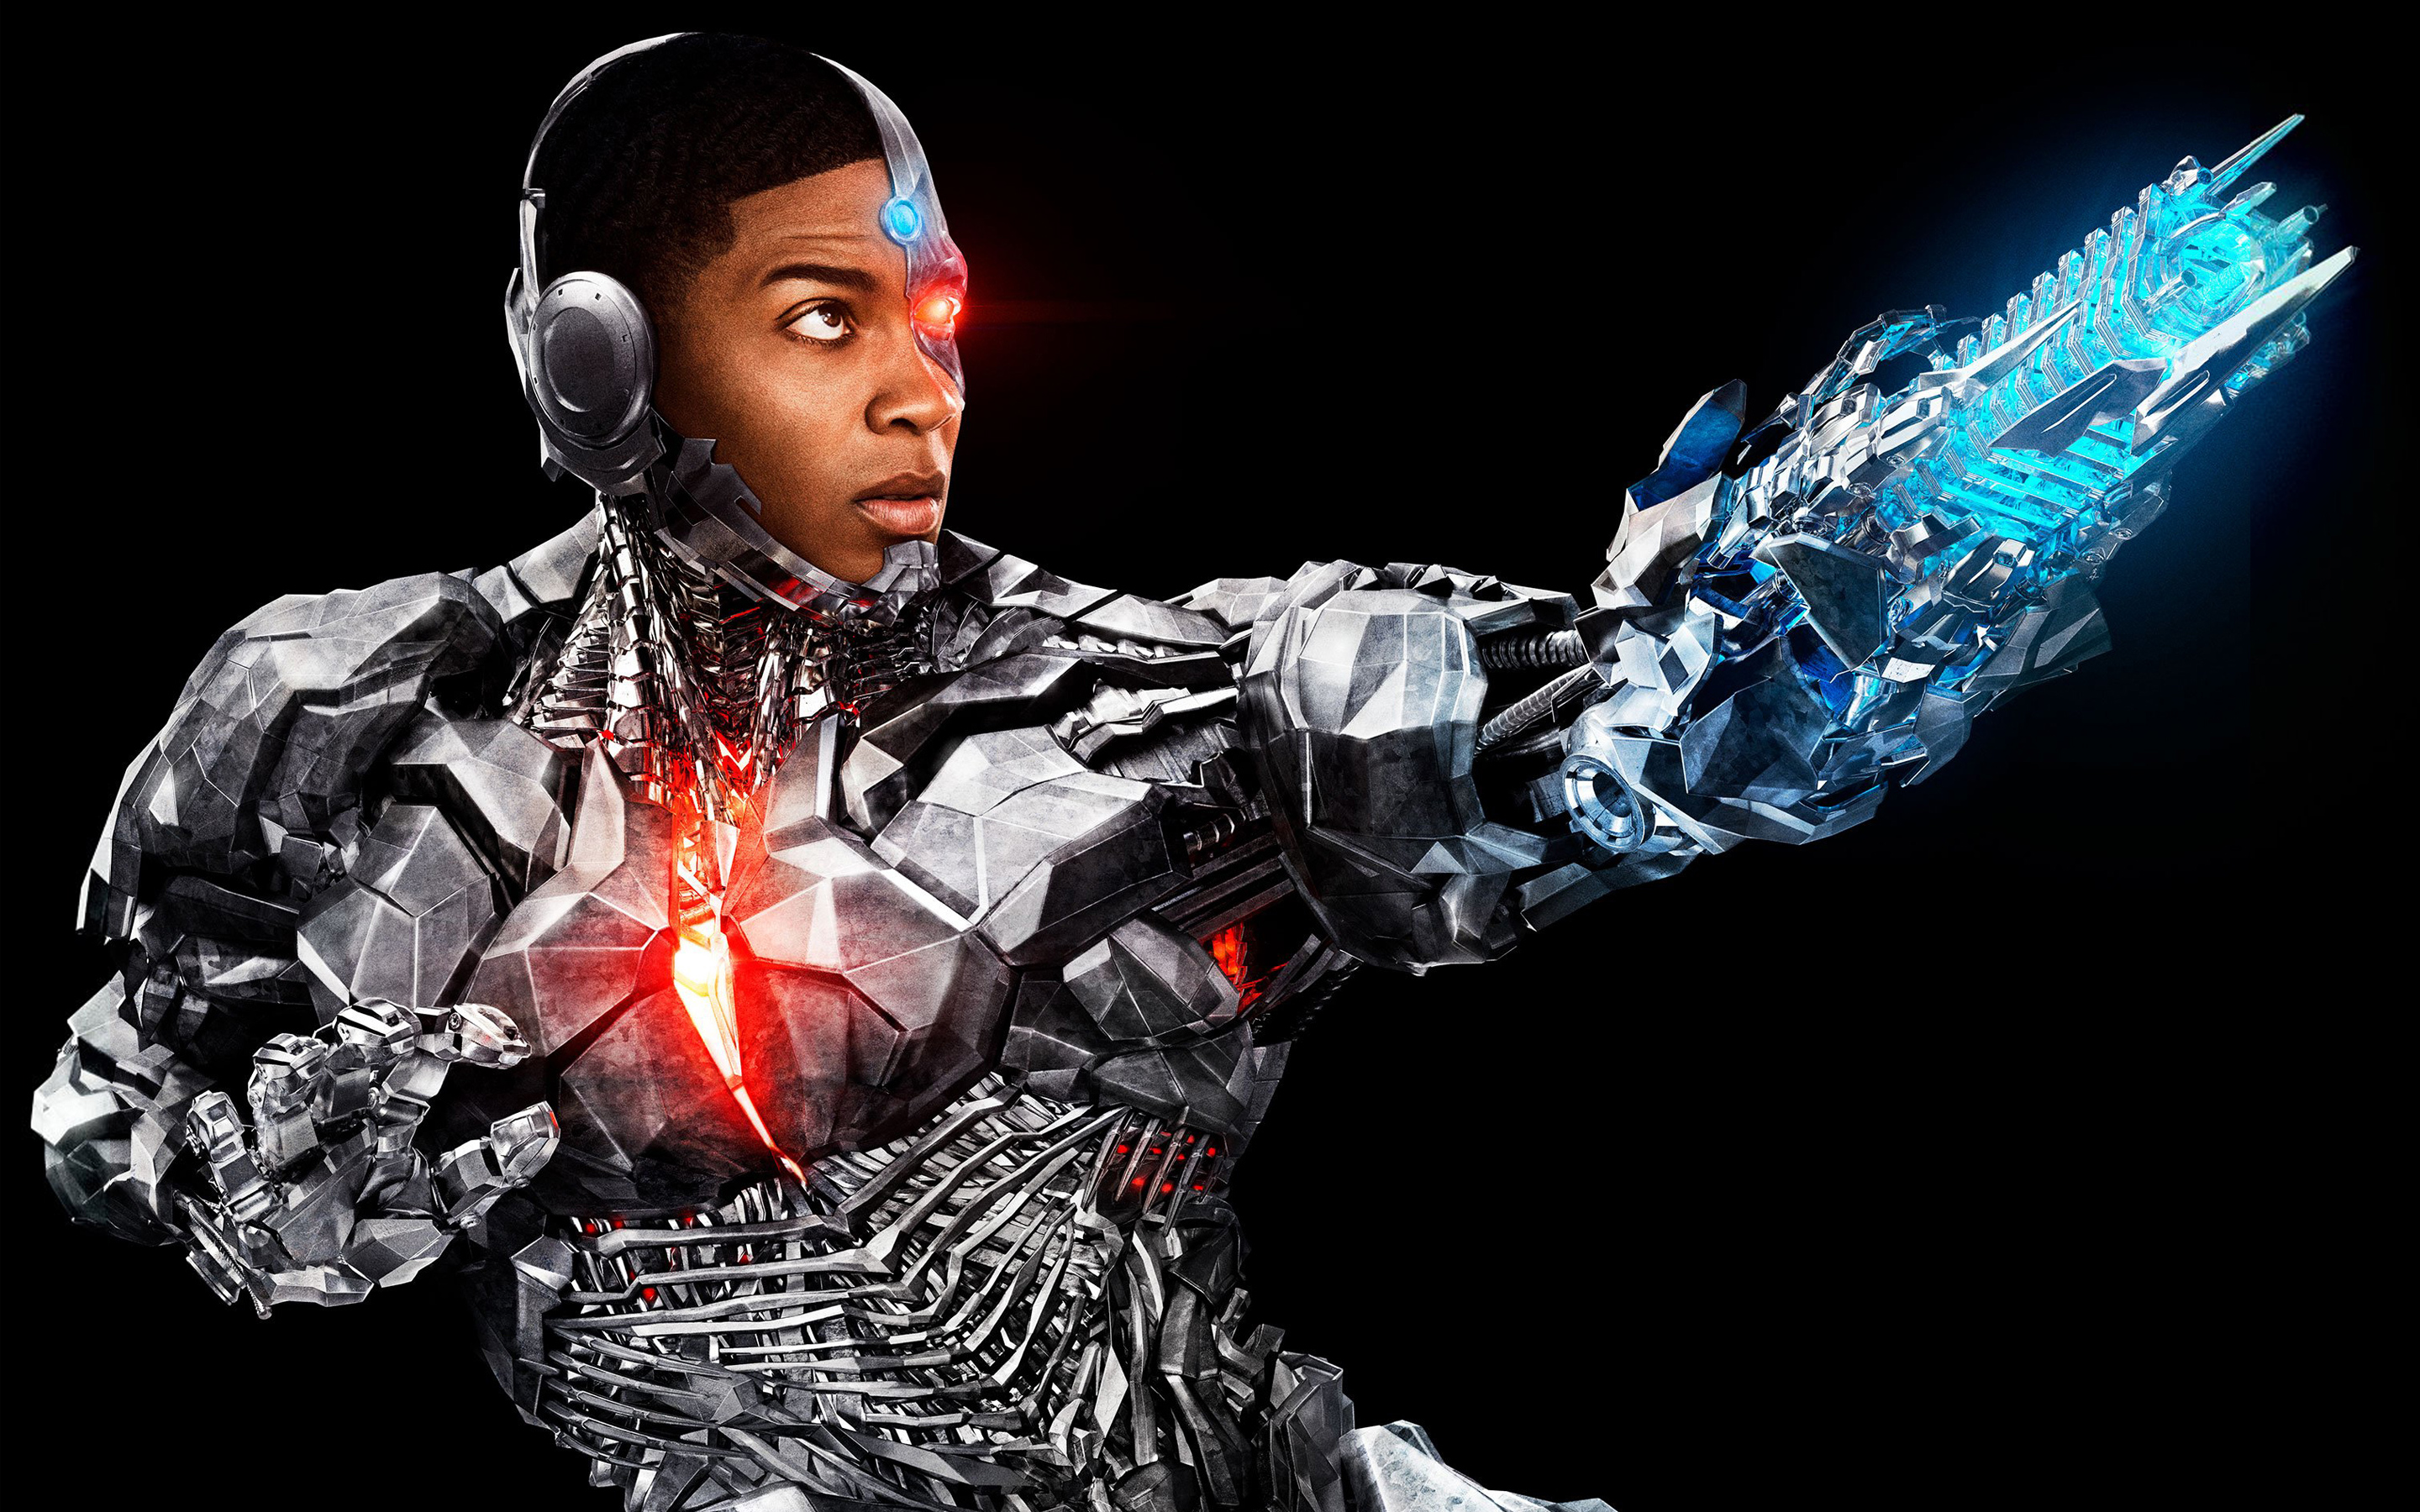 Cyborg In Justice League 2017 Wallpaper, HD Movies 4K